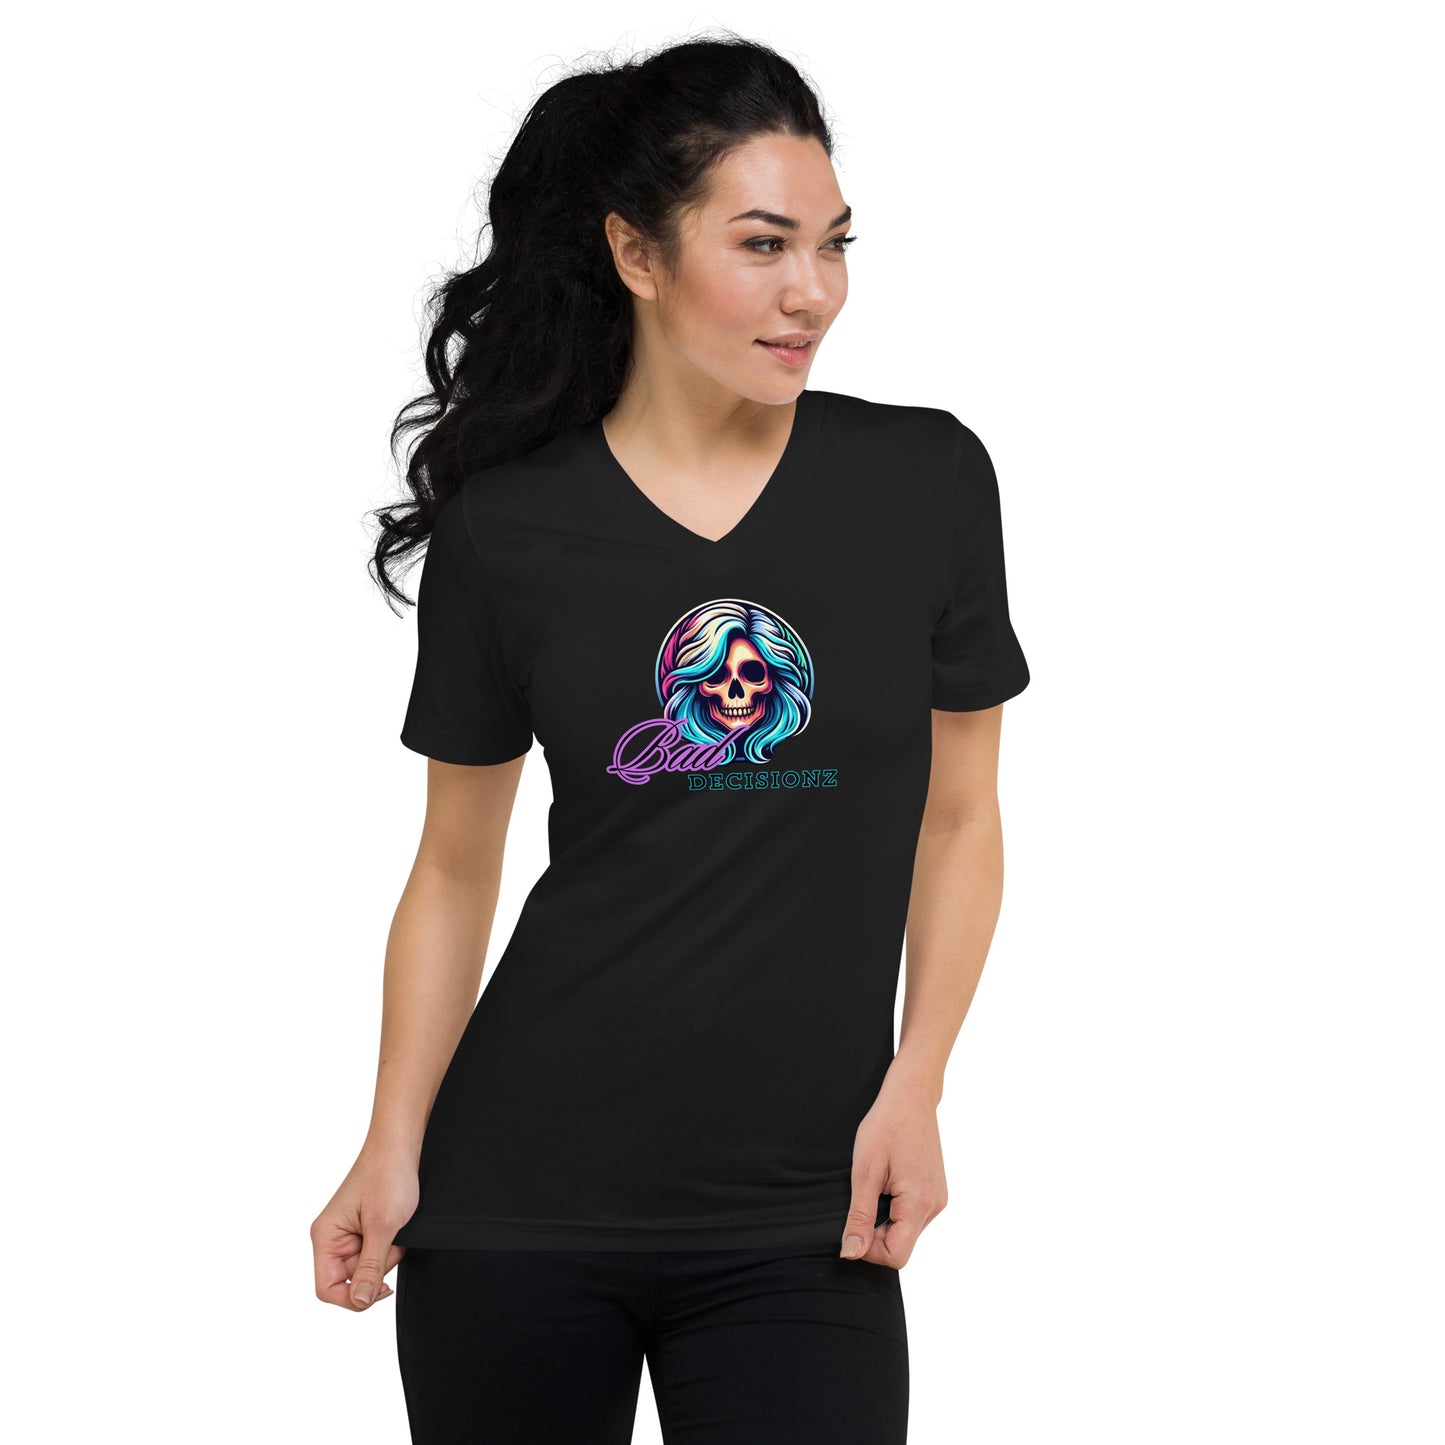 a woman wearing a black shirt with a skull on it